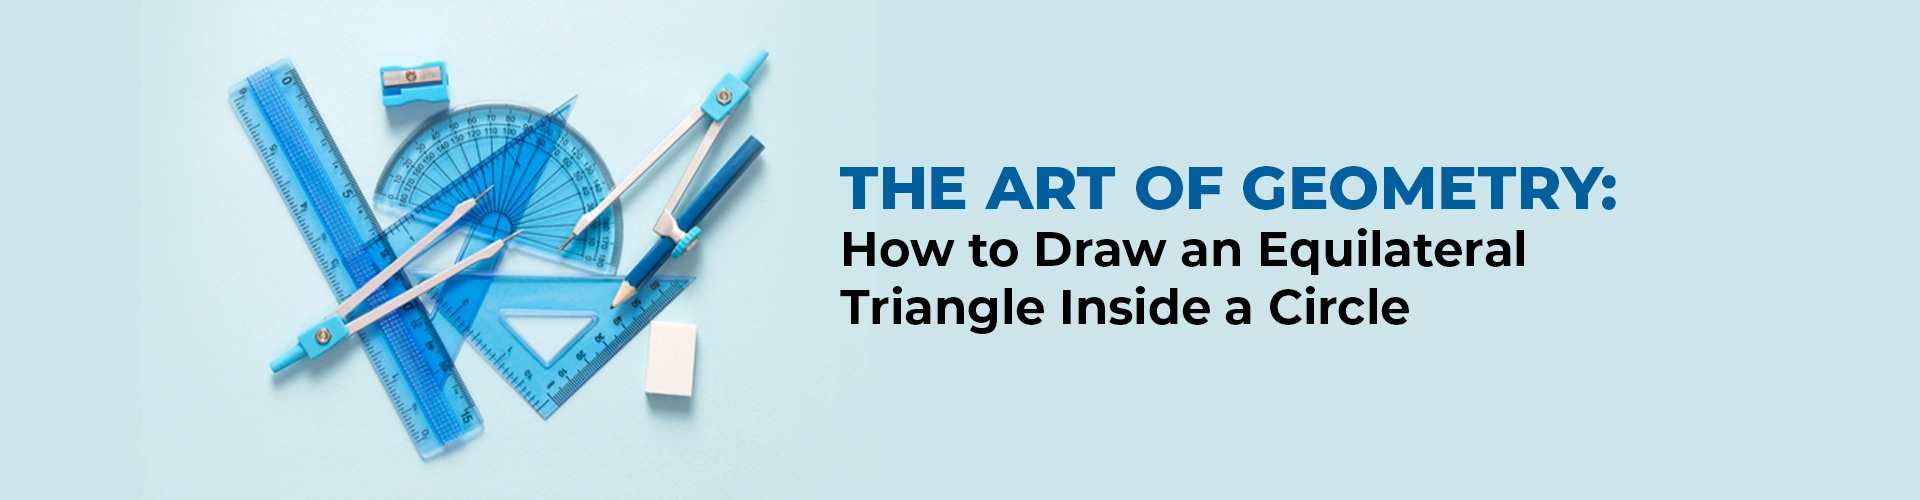 How to Draw an Equilateral Triangle Inside a Circle